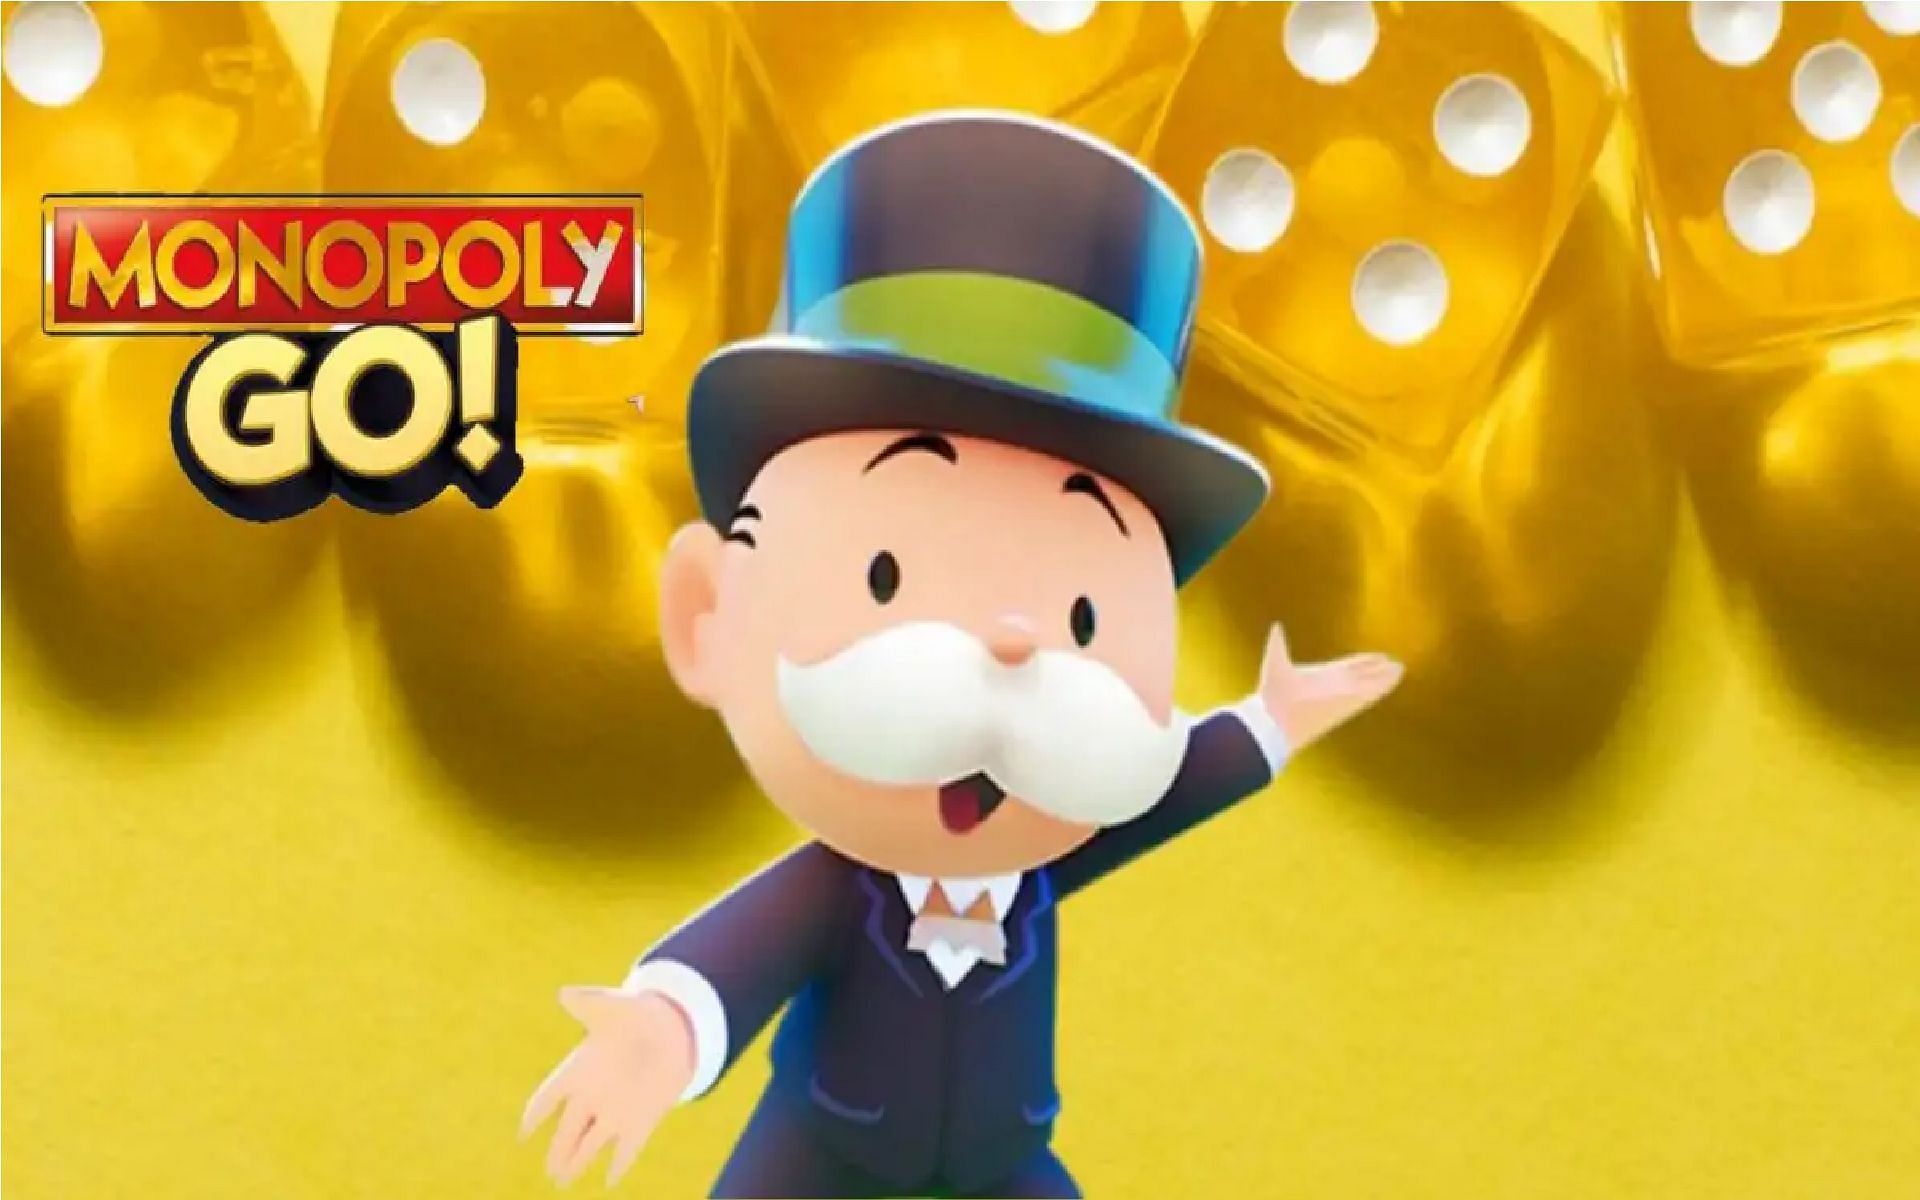 When can fans expect the next Monopoly Go Partner event? Leaks hint at